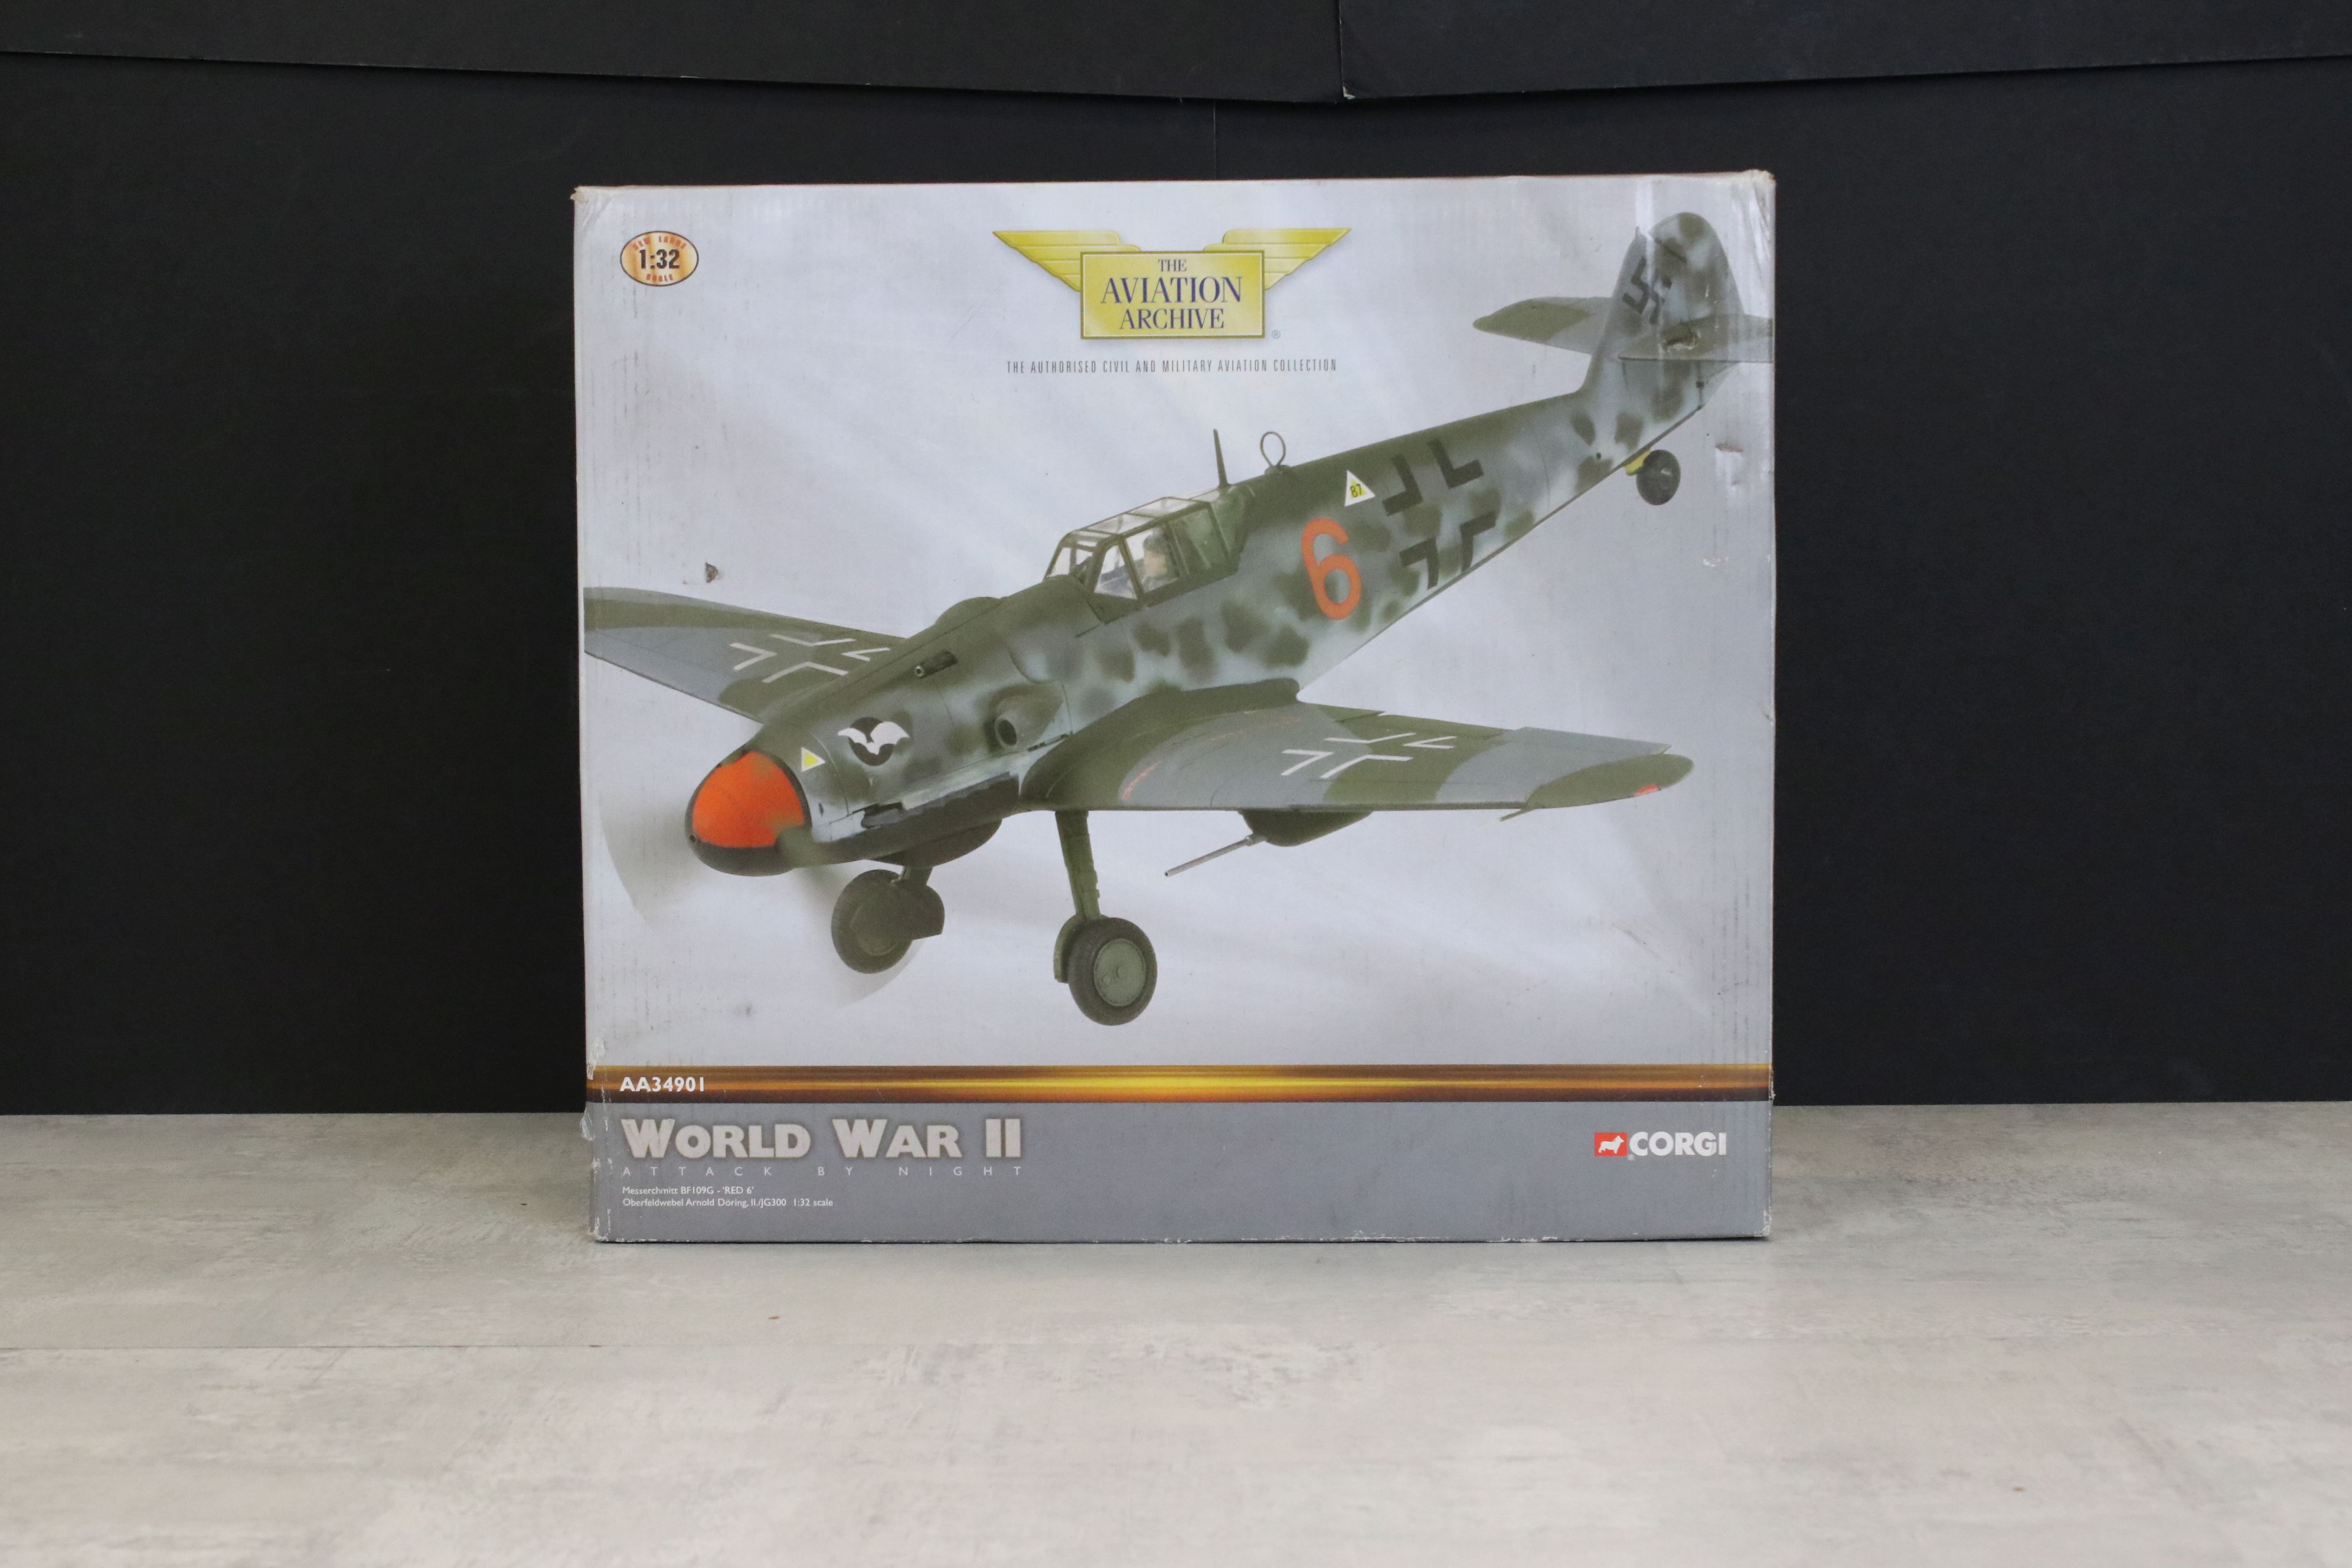 Two Boxed Corgi Aviation Archive 1:32 World War II diecast models to include AA34901 'Attack By - Image 9 of 15